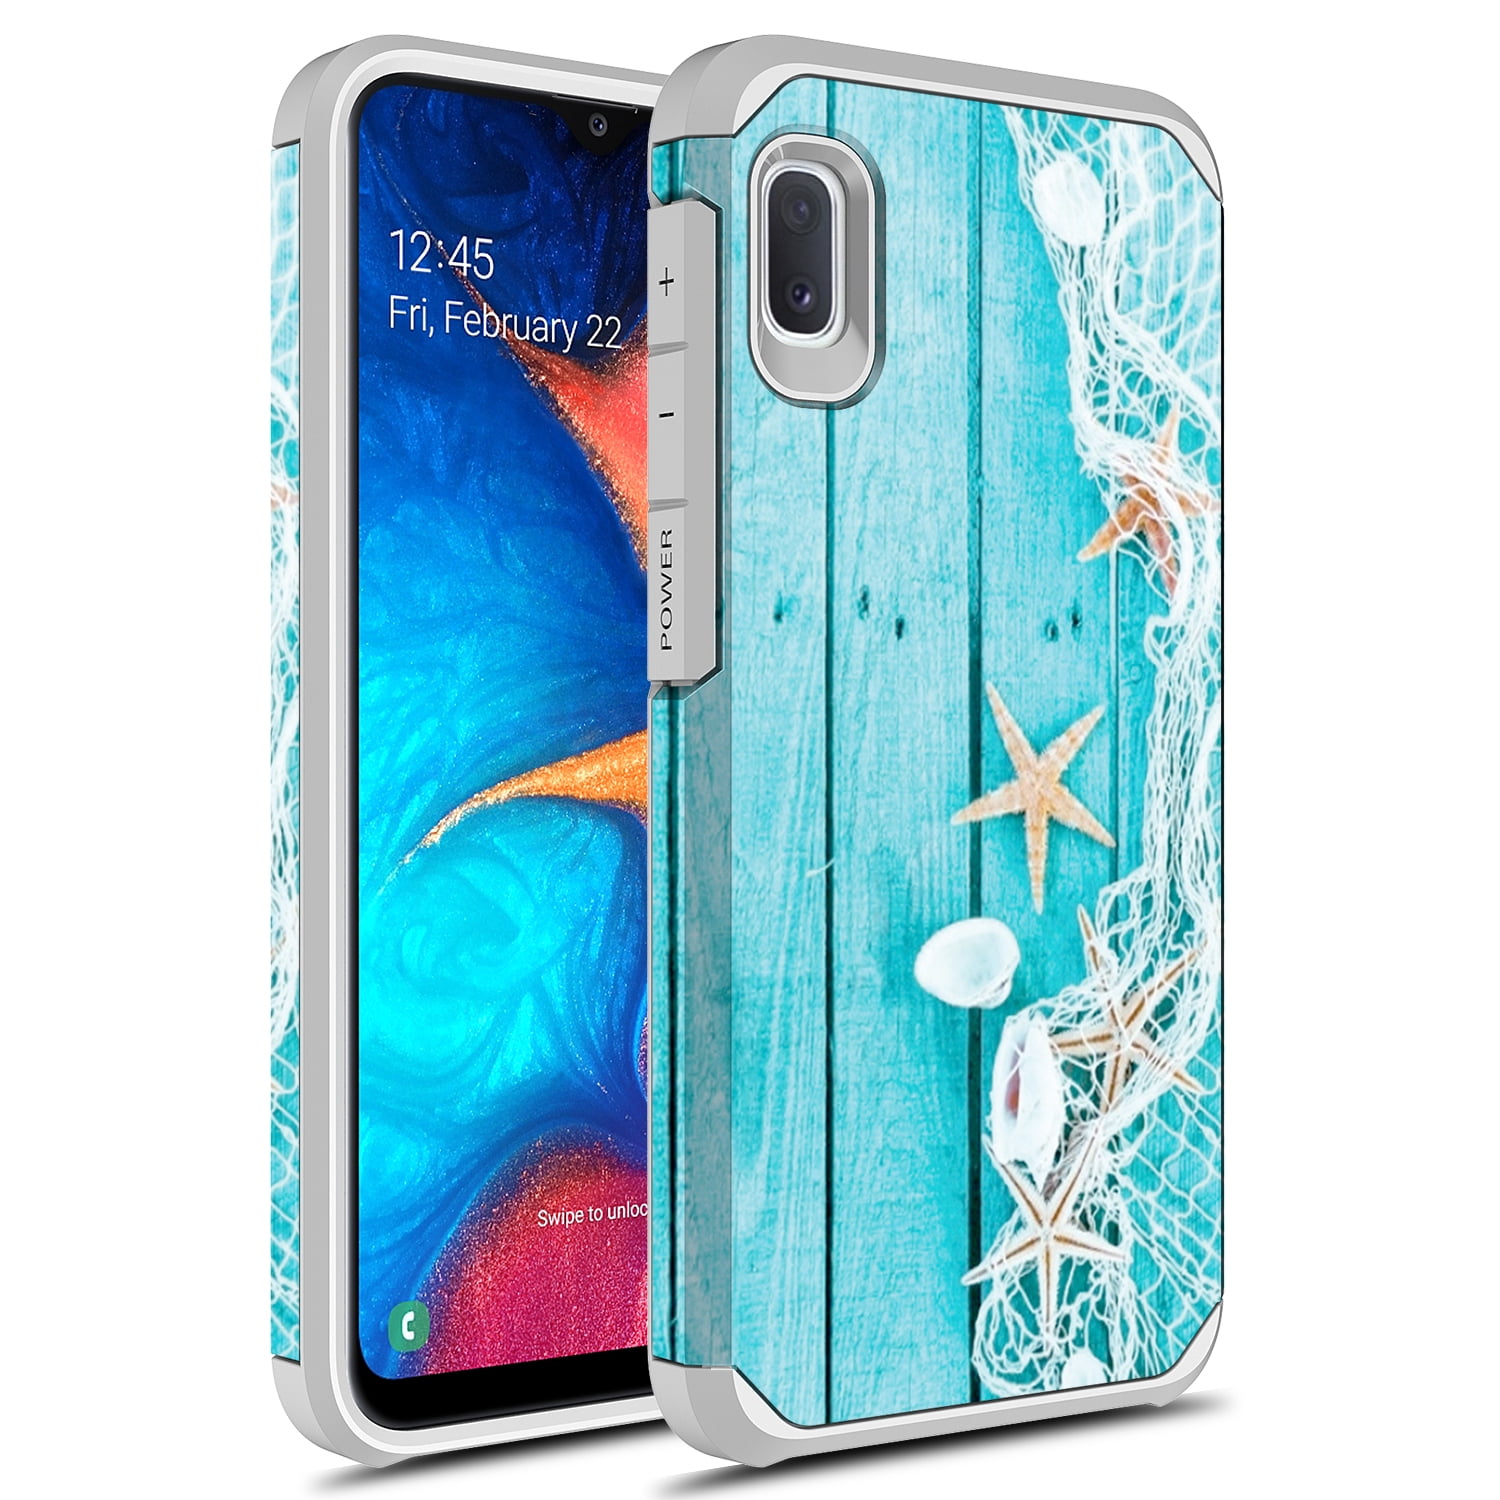 Dual Layered Cover w/Kickstand Rugged Shockproof Shock-Absorbing Impact-Protection Case Compatible with Samsung Galaxy Note 8 Colorful Cheetah 